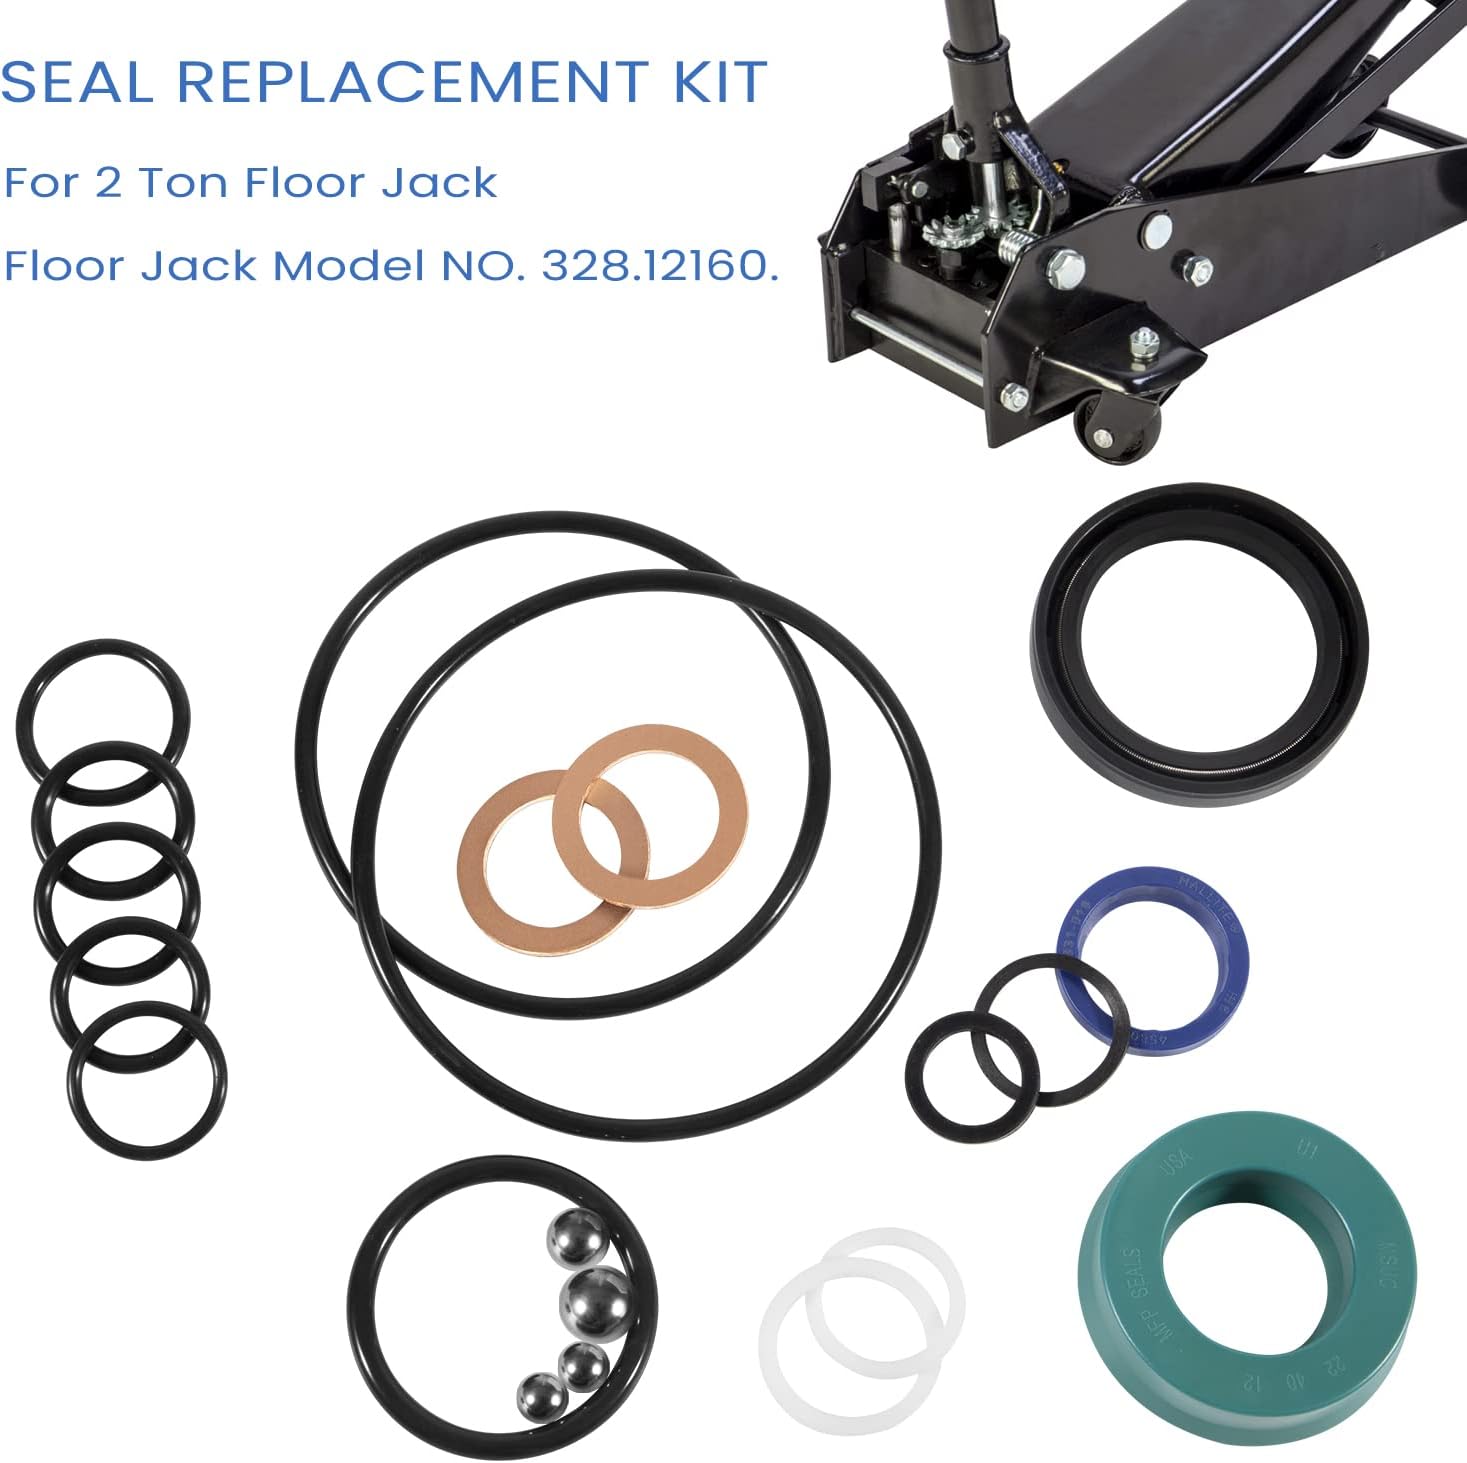 Sevencow LLC USA 328.12160 Seal Replacement Kit for 2 Ton - Floor Jack Model NO. 328.12160 Sears Craftsman Quality Replacement Parts for Repairs